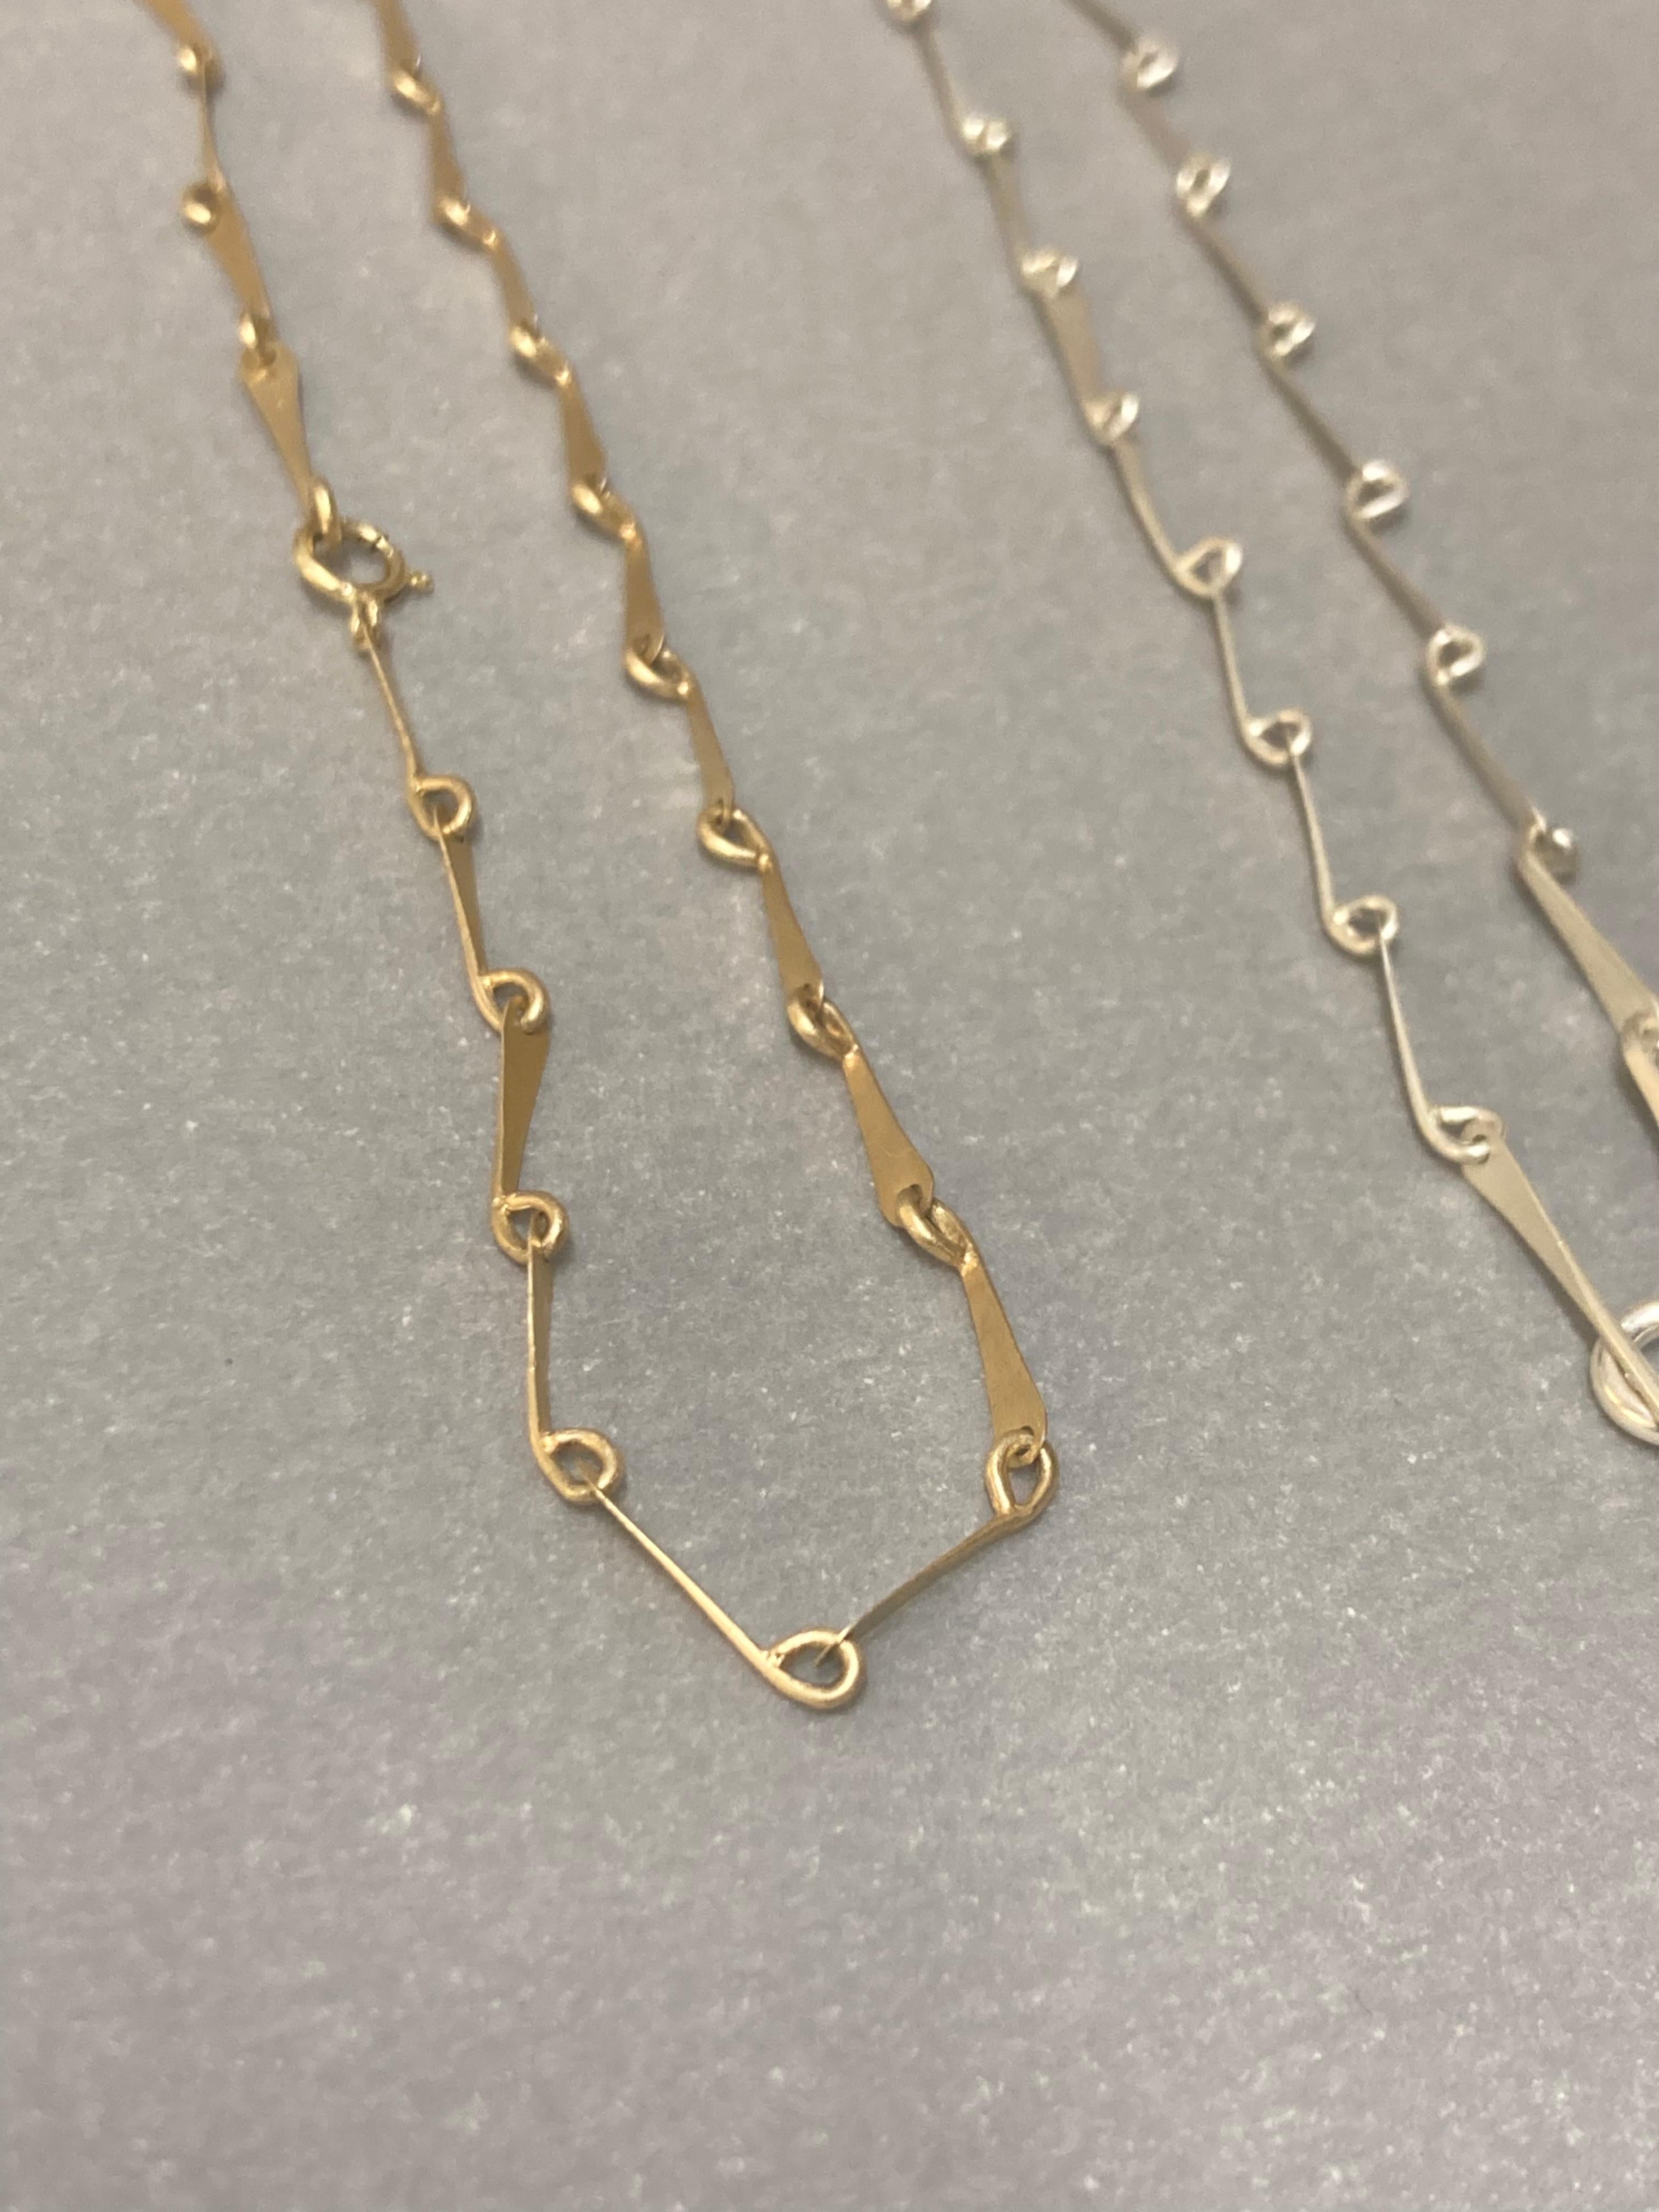 These lightweight chain is the perfect everyday piece. This flowy linked chain is inspired by the articulated legs of insects. 

It is intricately fabricated from 9ct recycled yellow gold forged links, and finished with a matte sheen to catch the